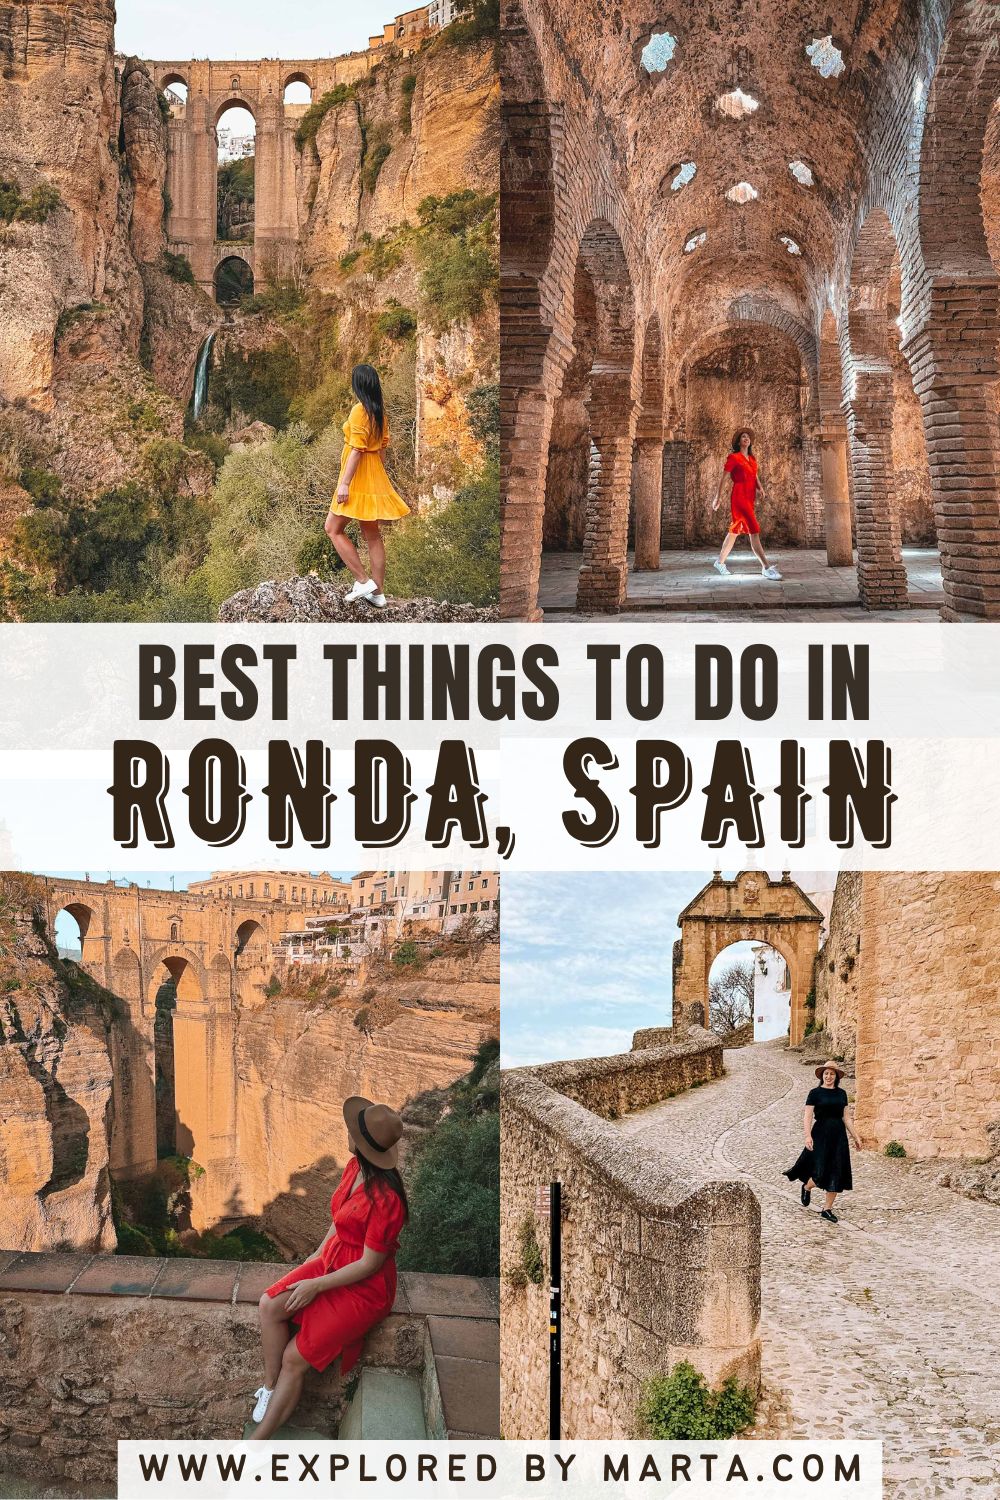 Top bucket list things to do in Ronda, Spain